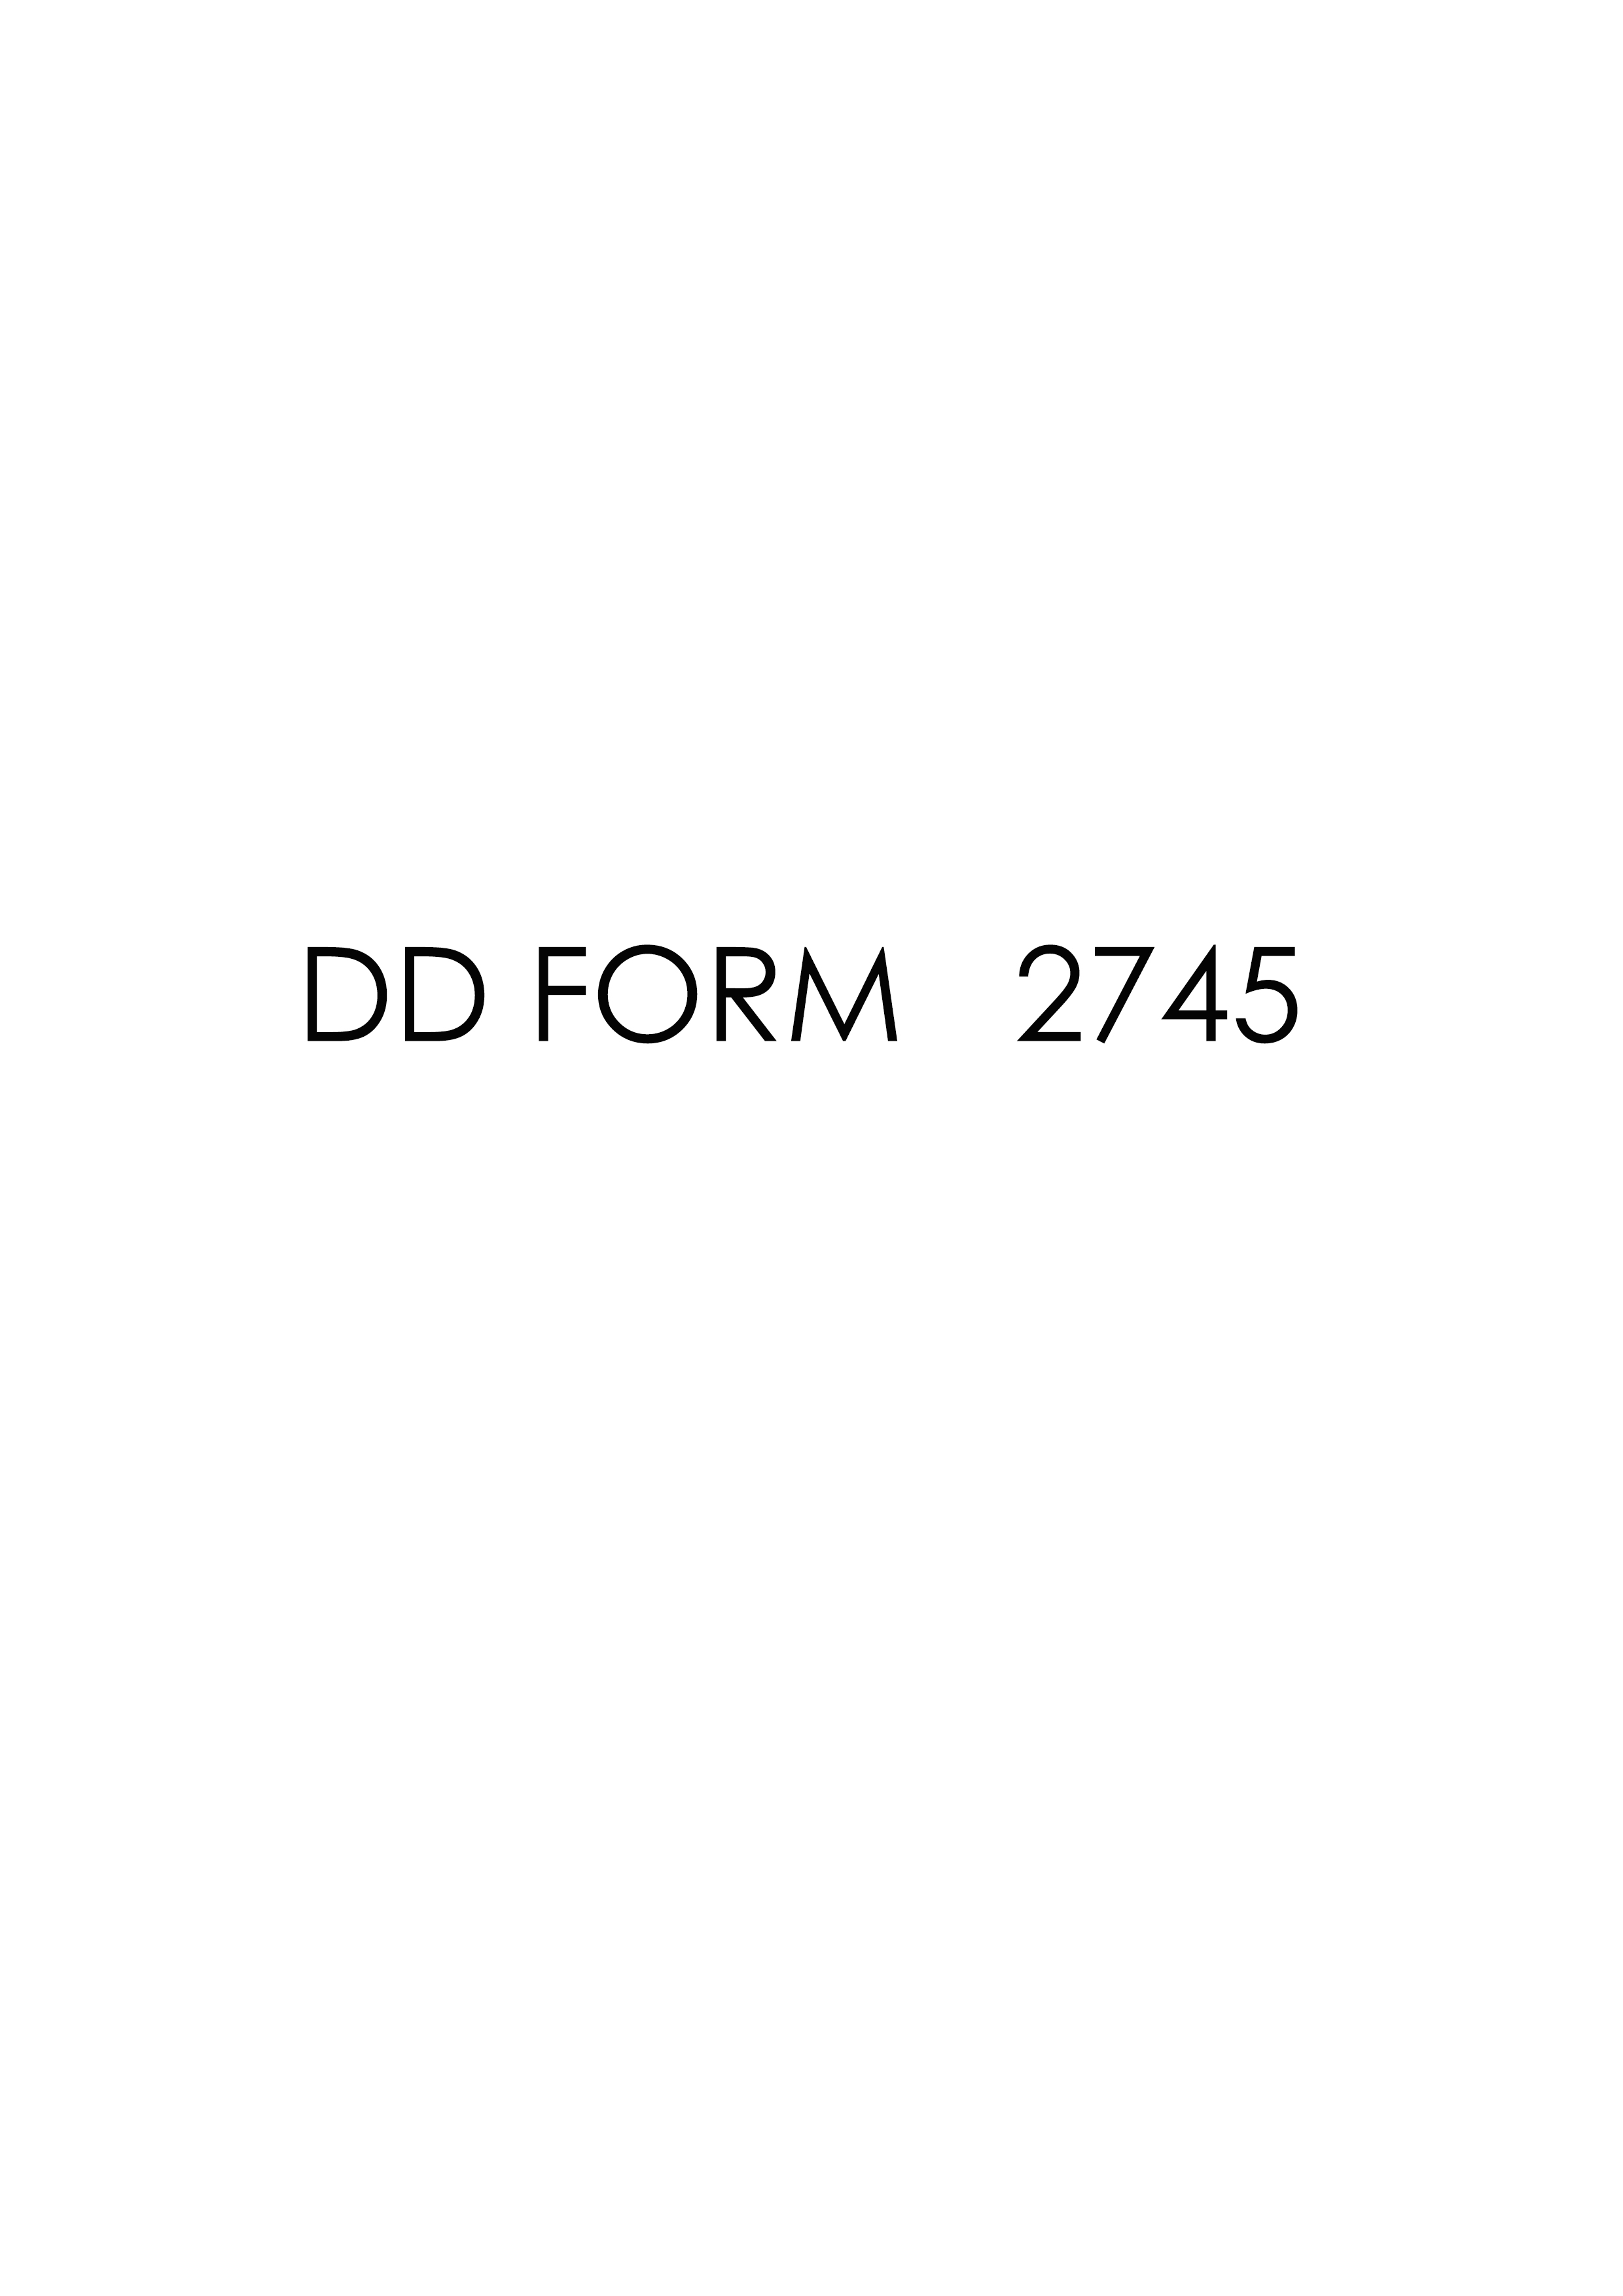 Download Fillable Dd Form 2745